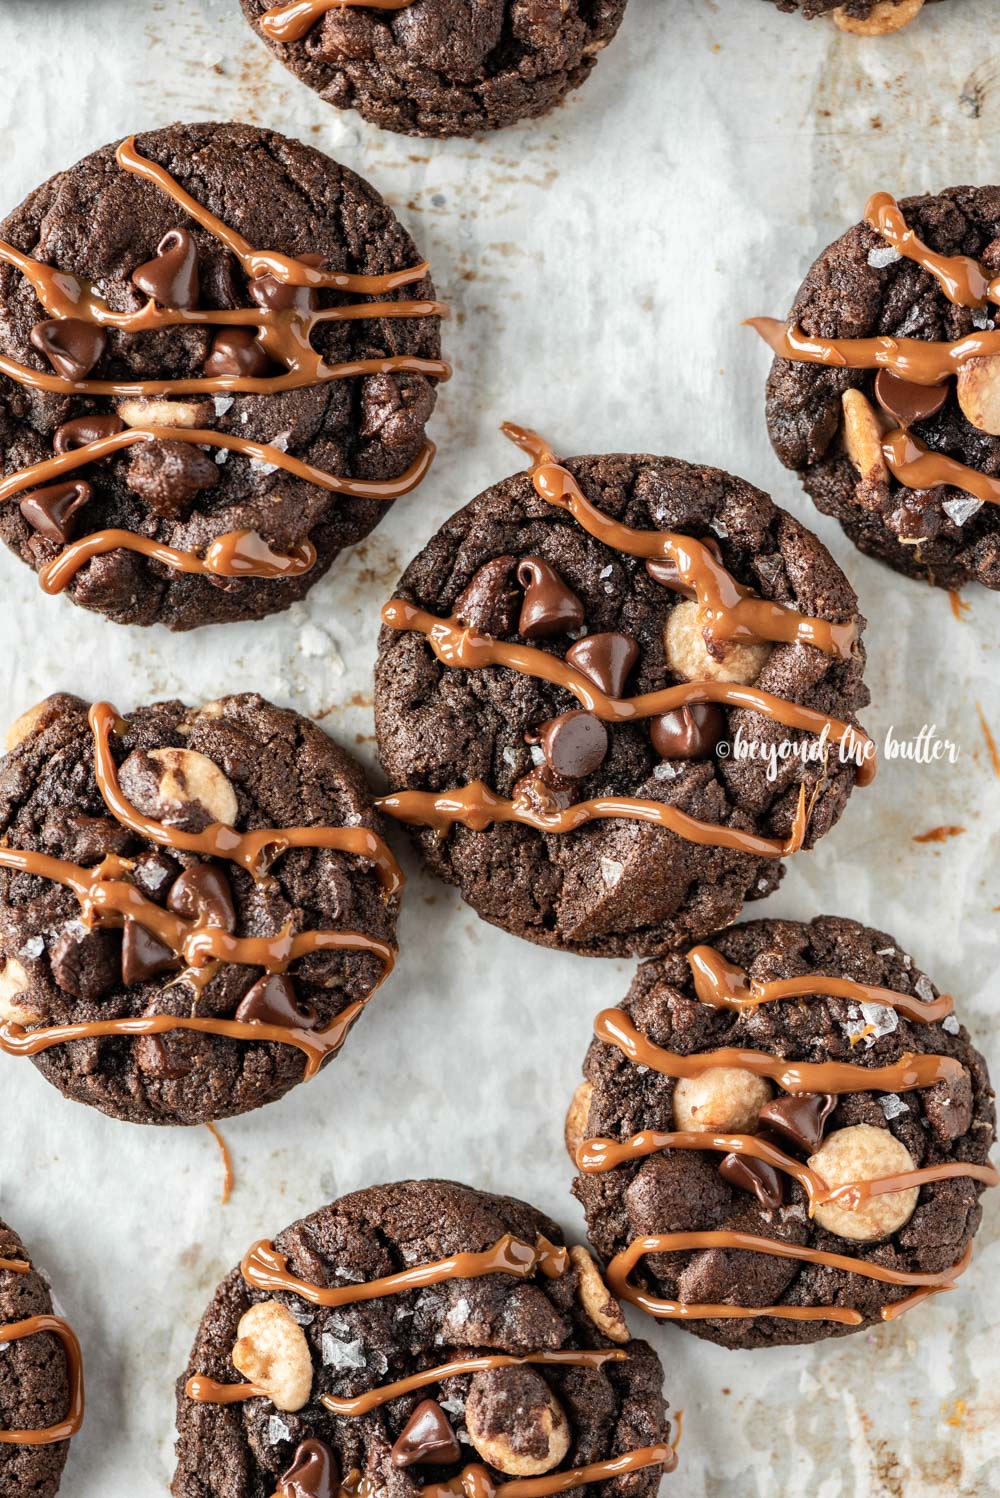 Overhead image of just baked double chocolate salted caramel cookies on a baking sheet with caramel drizzled over the top of each cookie | All Images © Beyond the Butter™